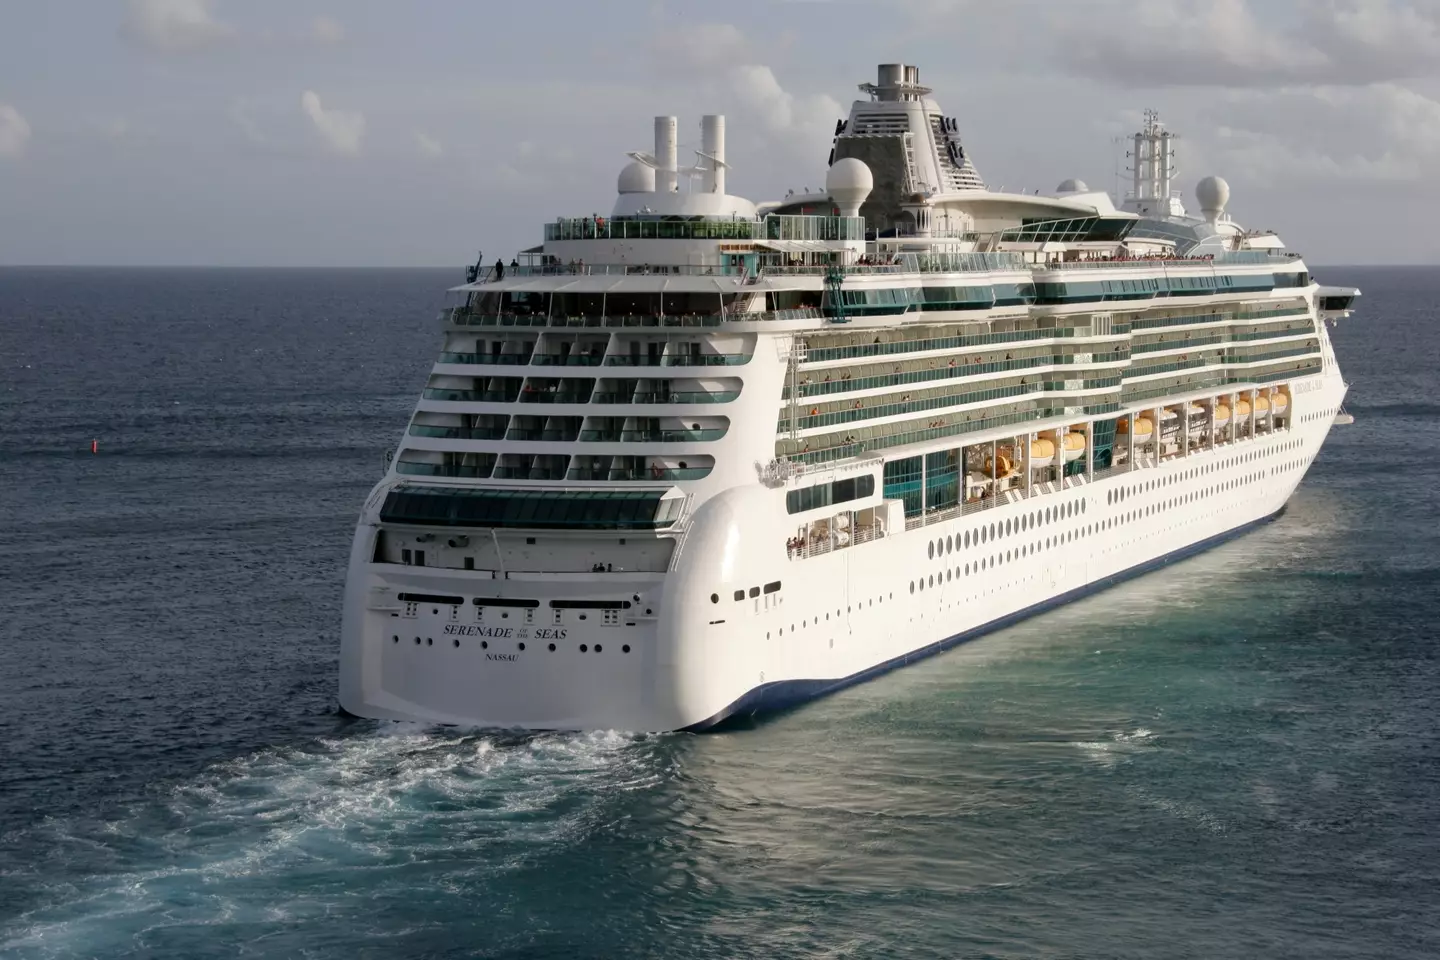 The cruise's itinerary may be adapted for the safety of passengers and crew.